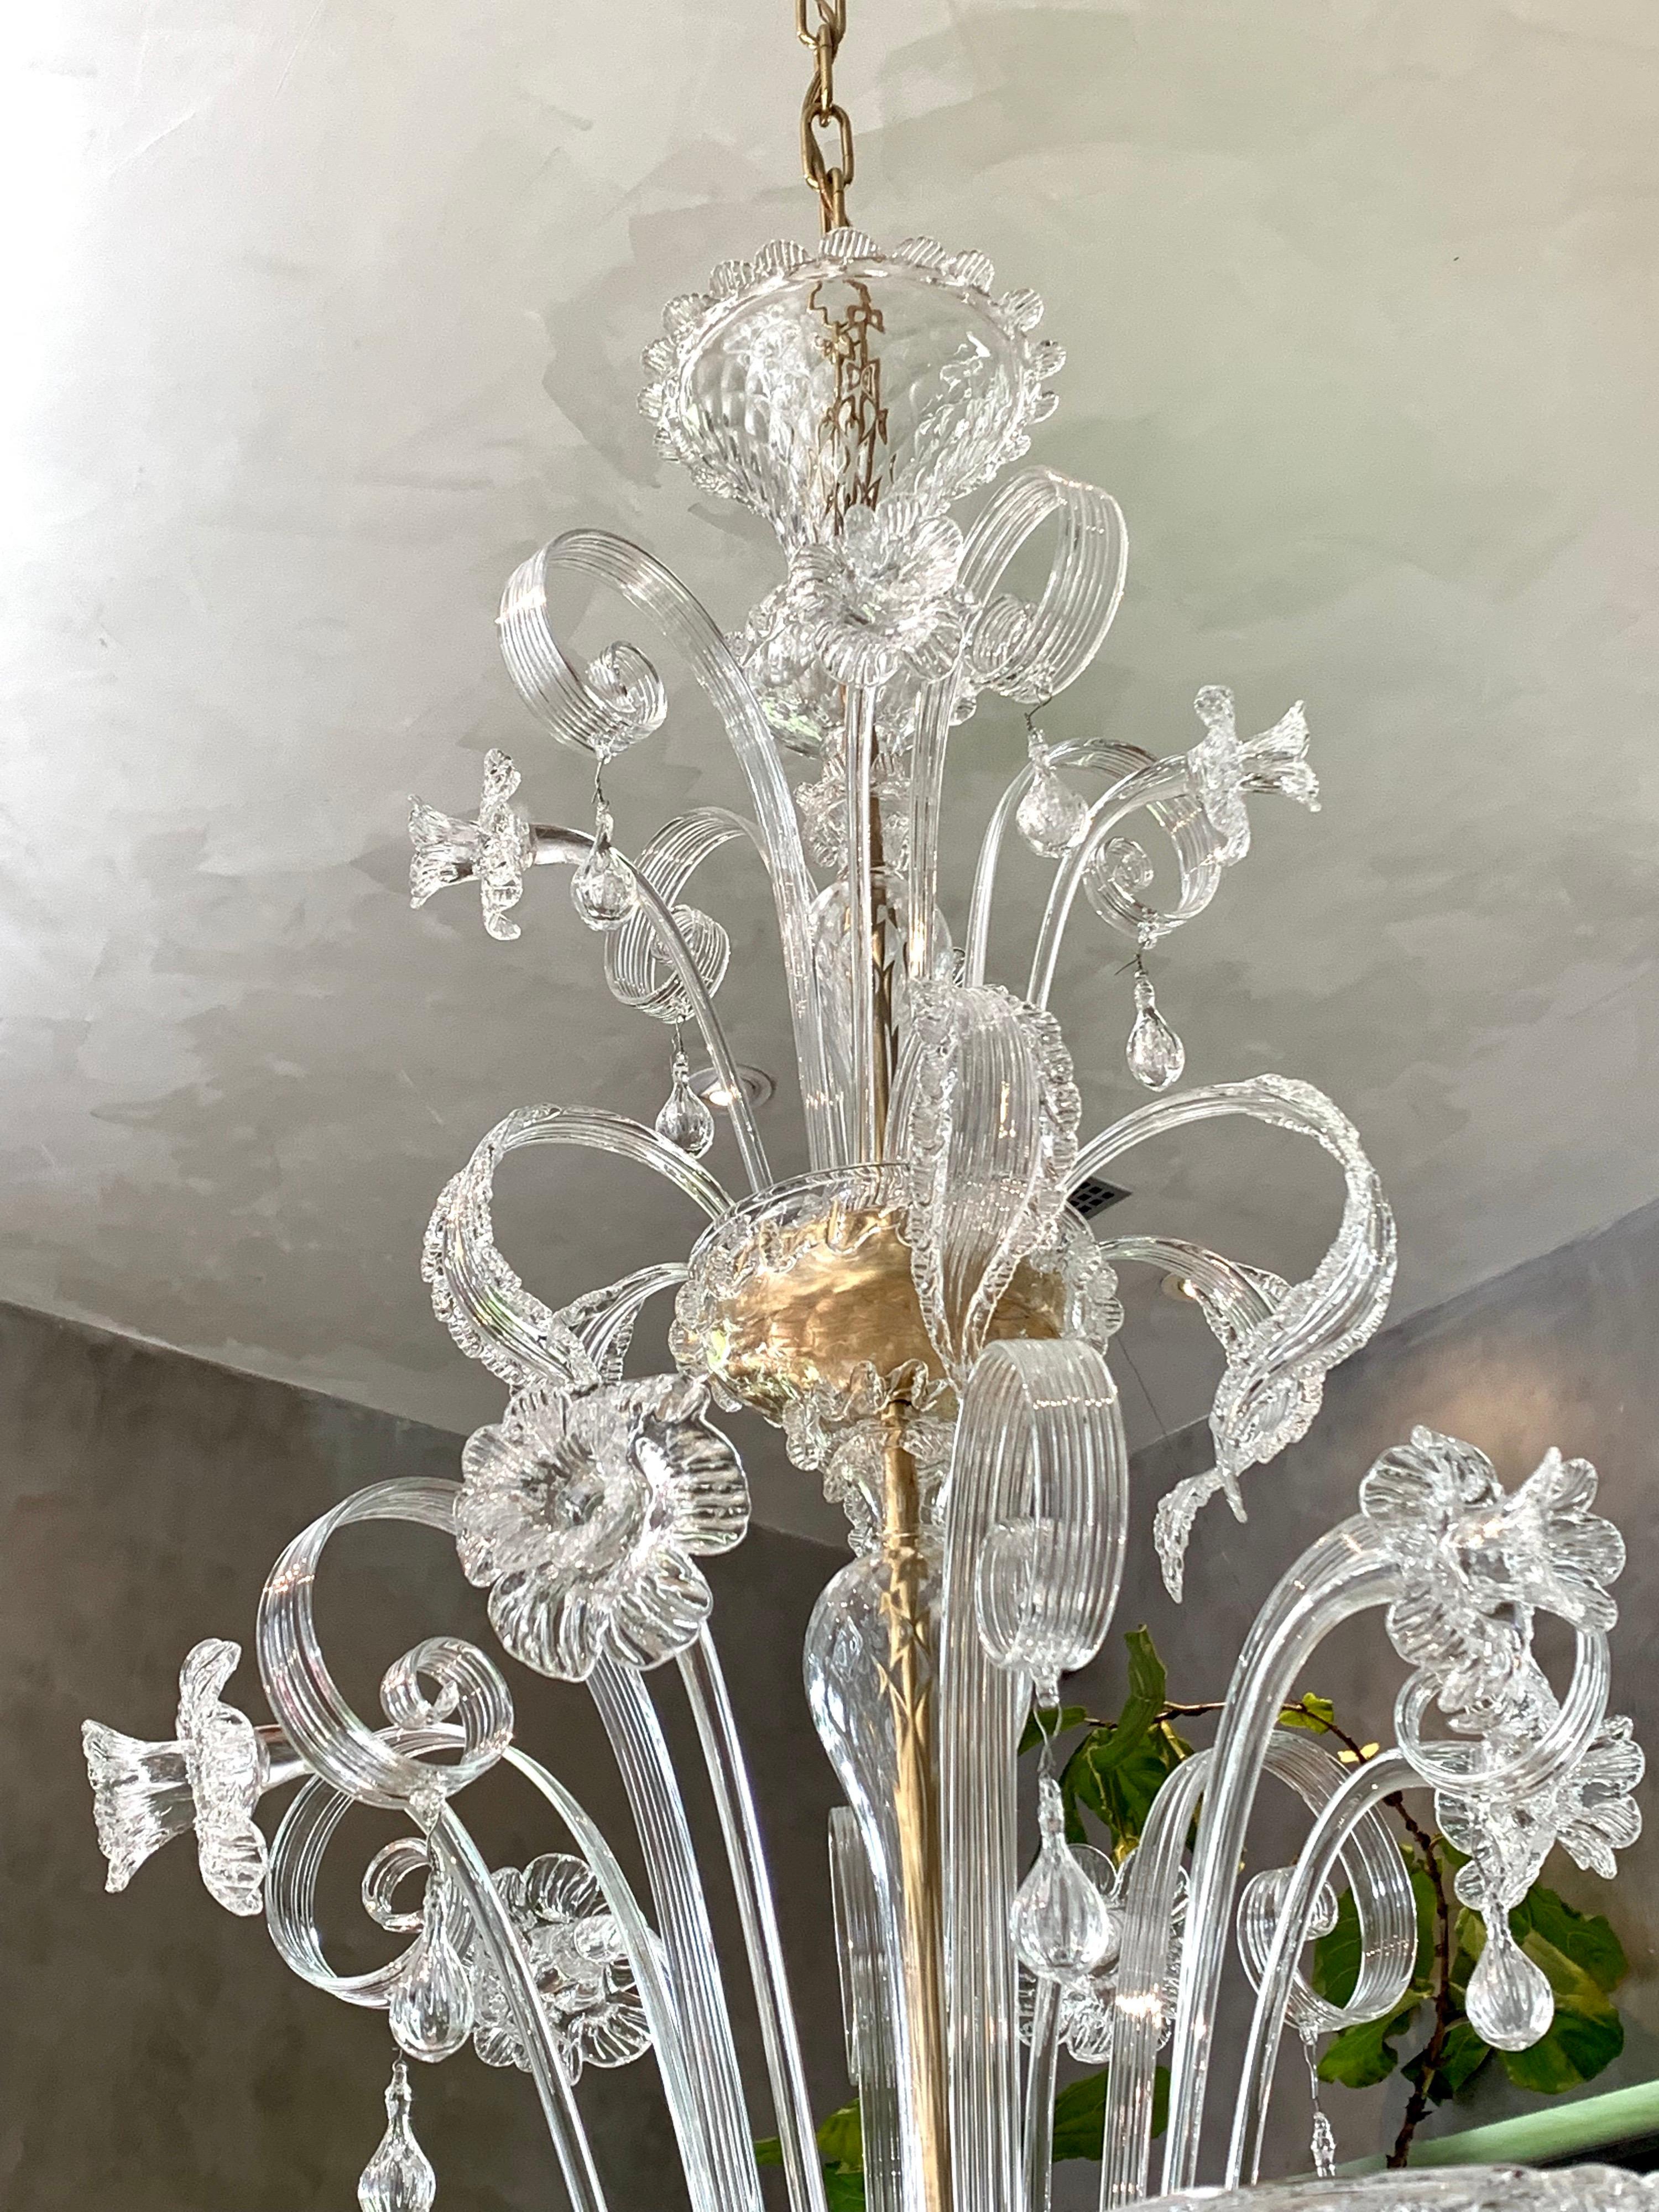 This hand blown clear crystal eight arm chandelier was made in Italy on the Island of Murano outside of Venice, known for it's superlative craftsmanship in glassworks dating back to the late 1200s.
This spectacular chandelier resembles a three-tier